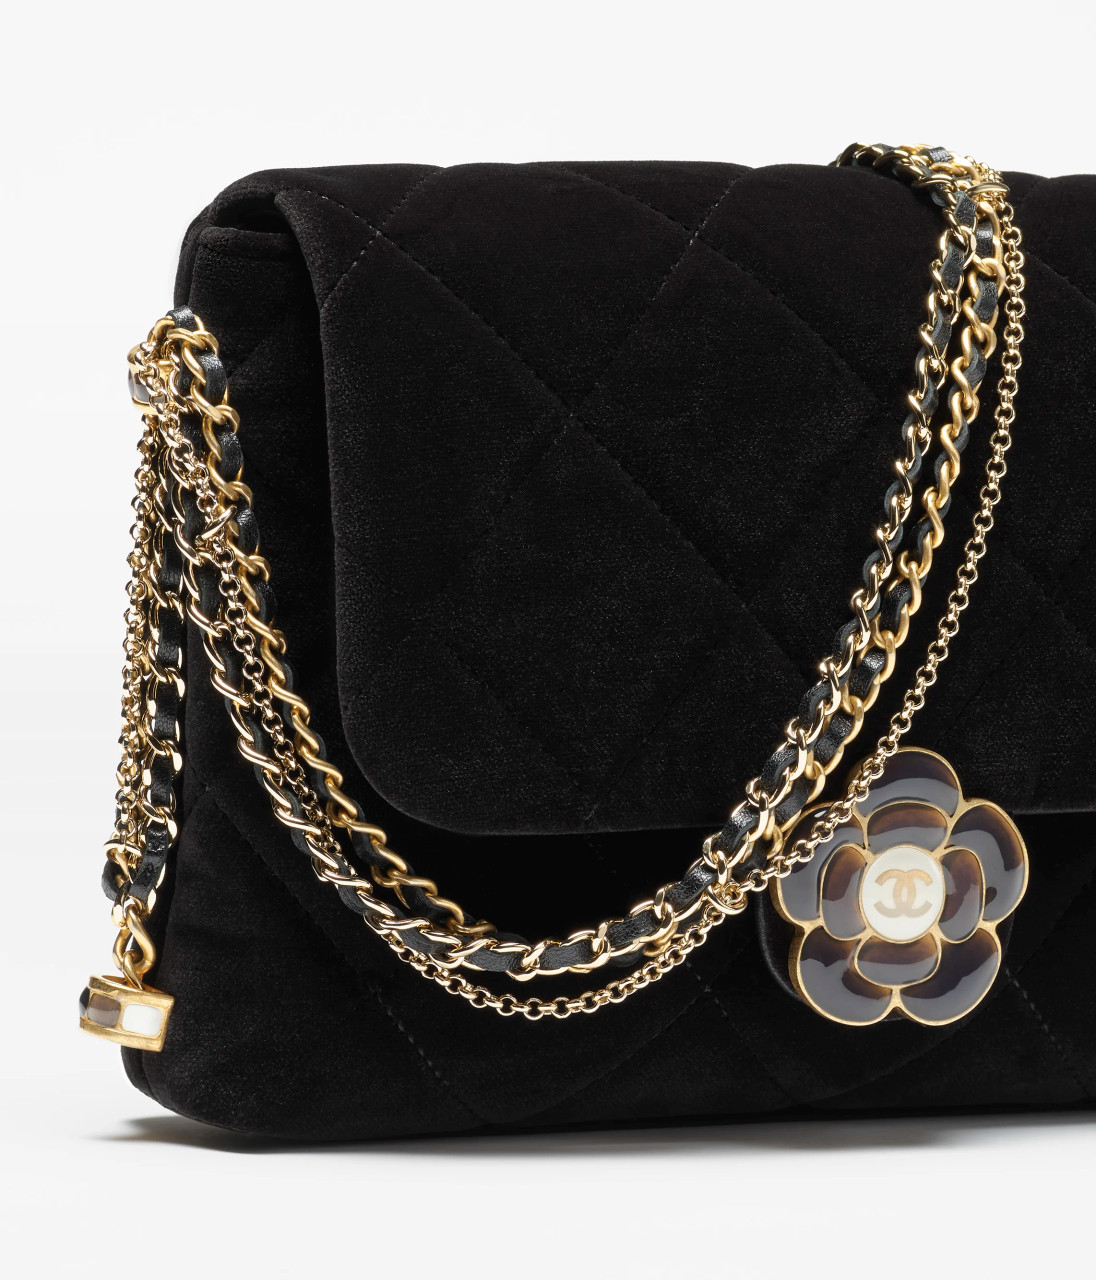 CHANEL Lambskin Quilted Round Mini Chain Bag